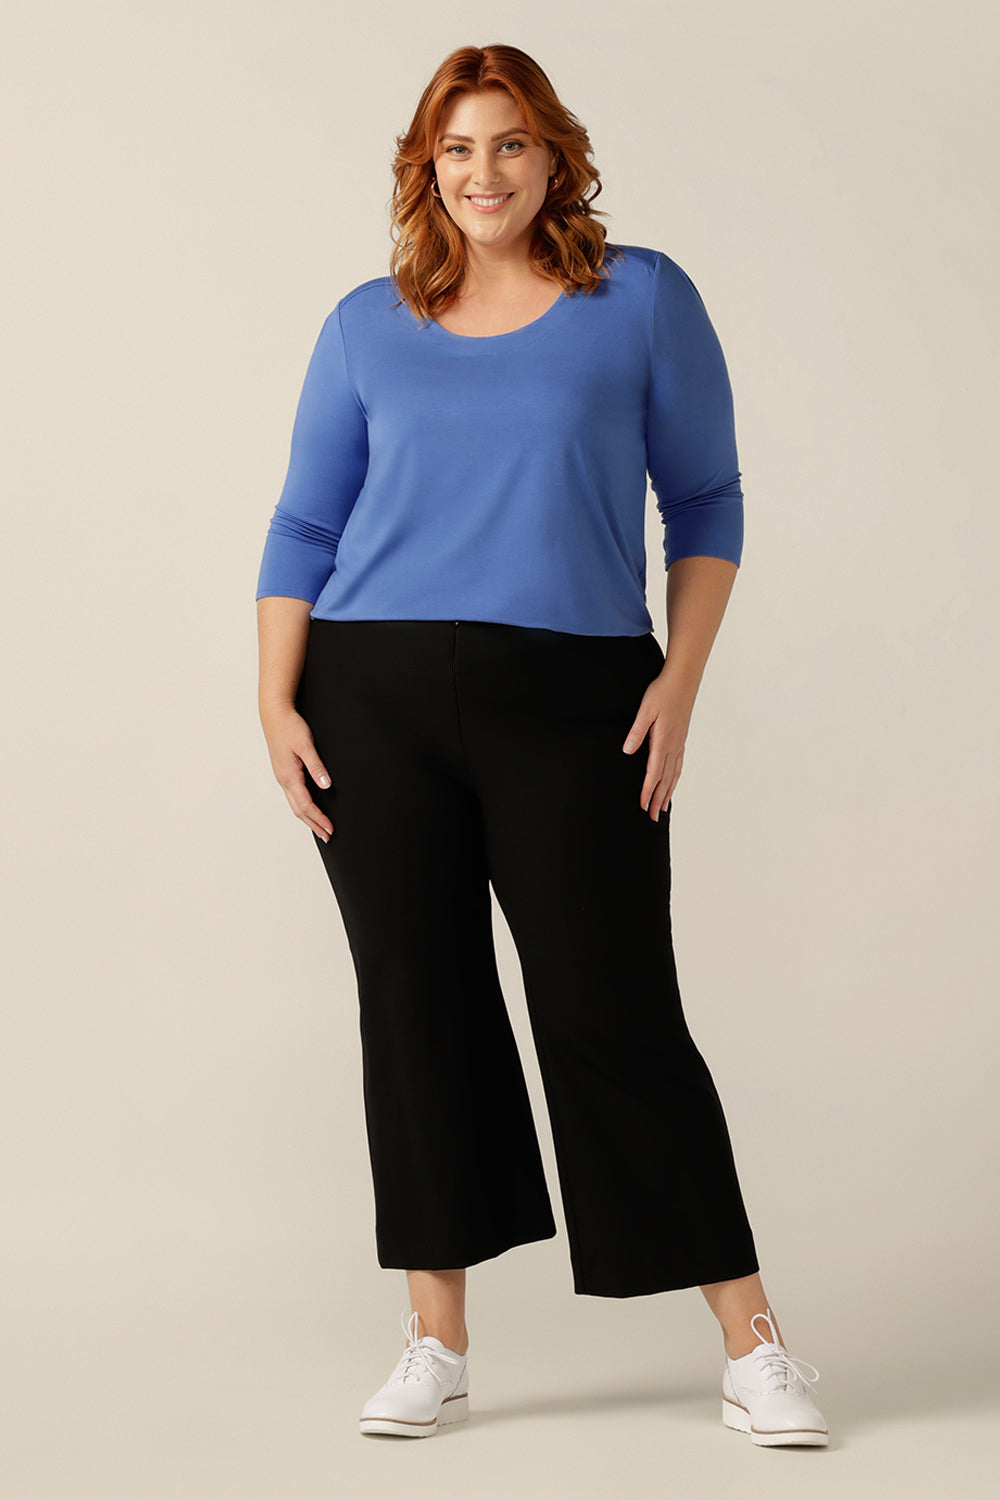 A plus size, size 18 woman wears a blue bamboo jersey top. The top has a round neckline, 3/4 sleeves, and a curved shirttail hemline. Worn with black work wear pants, tuck in this bamboo jersey top and she becomes a smart-casual work wear top. 